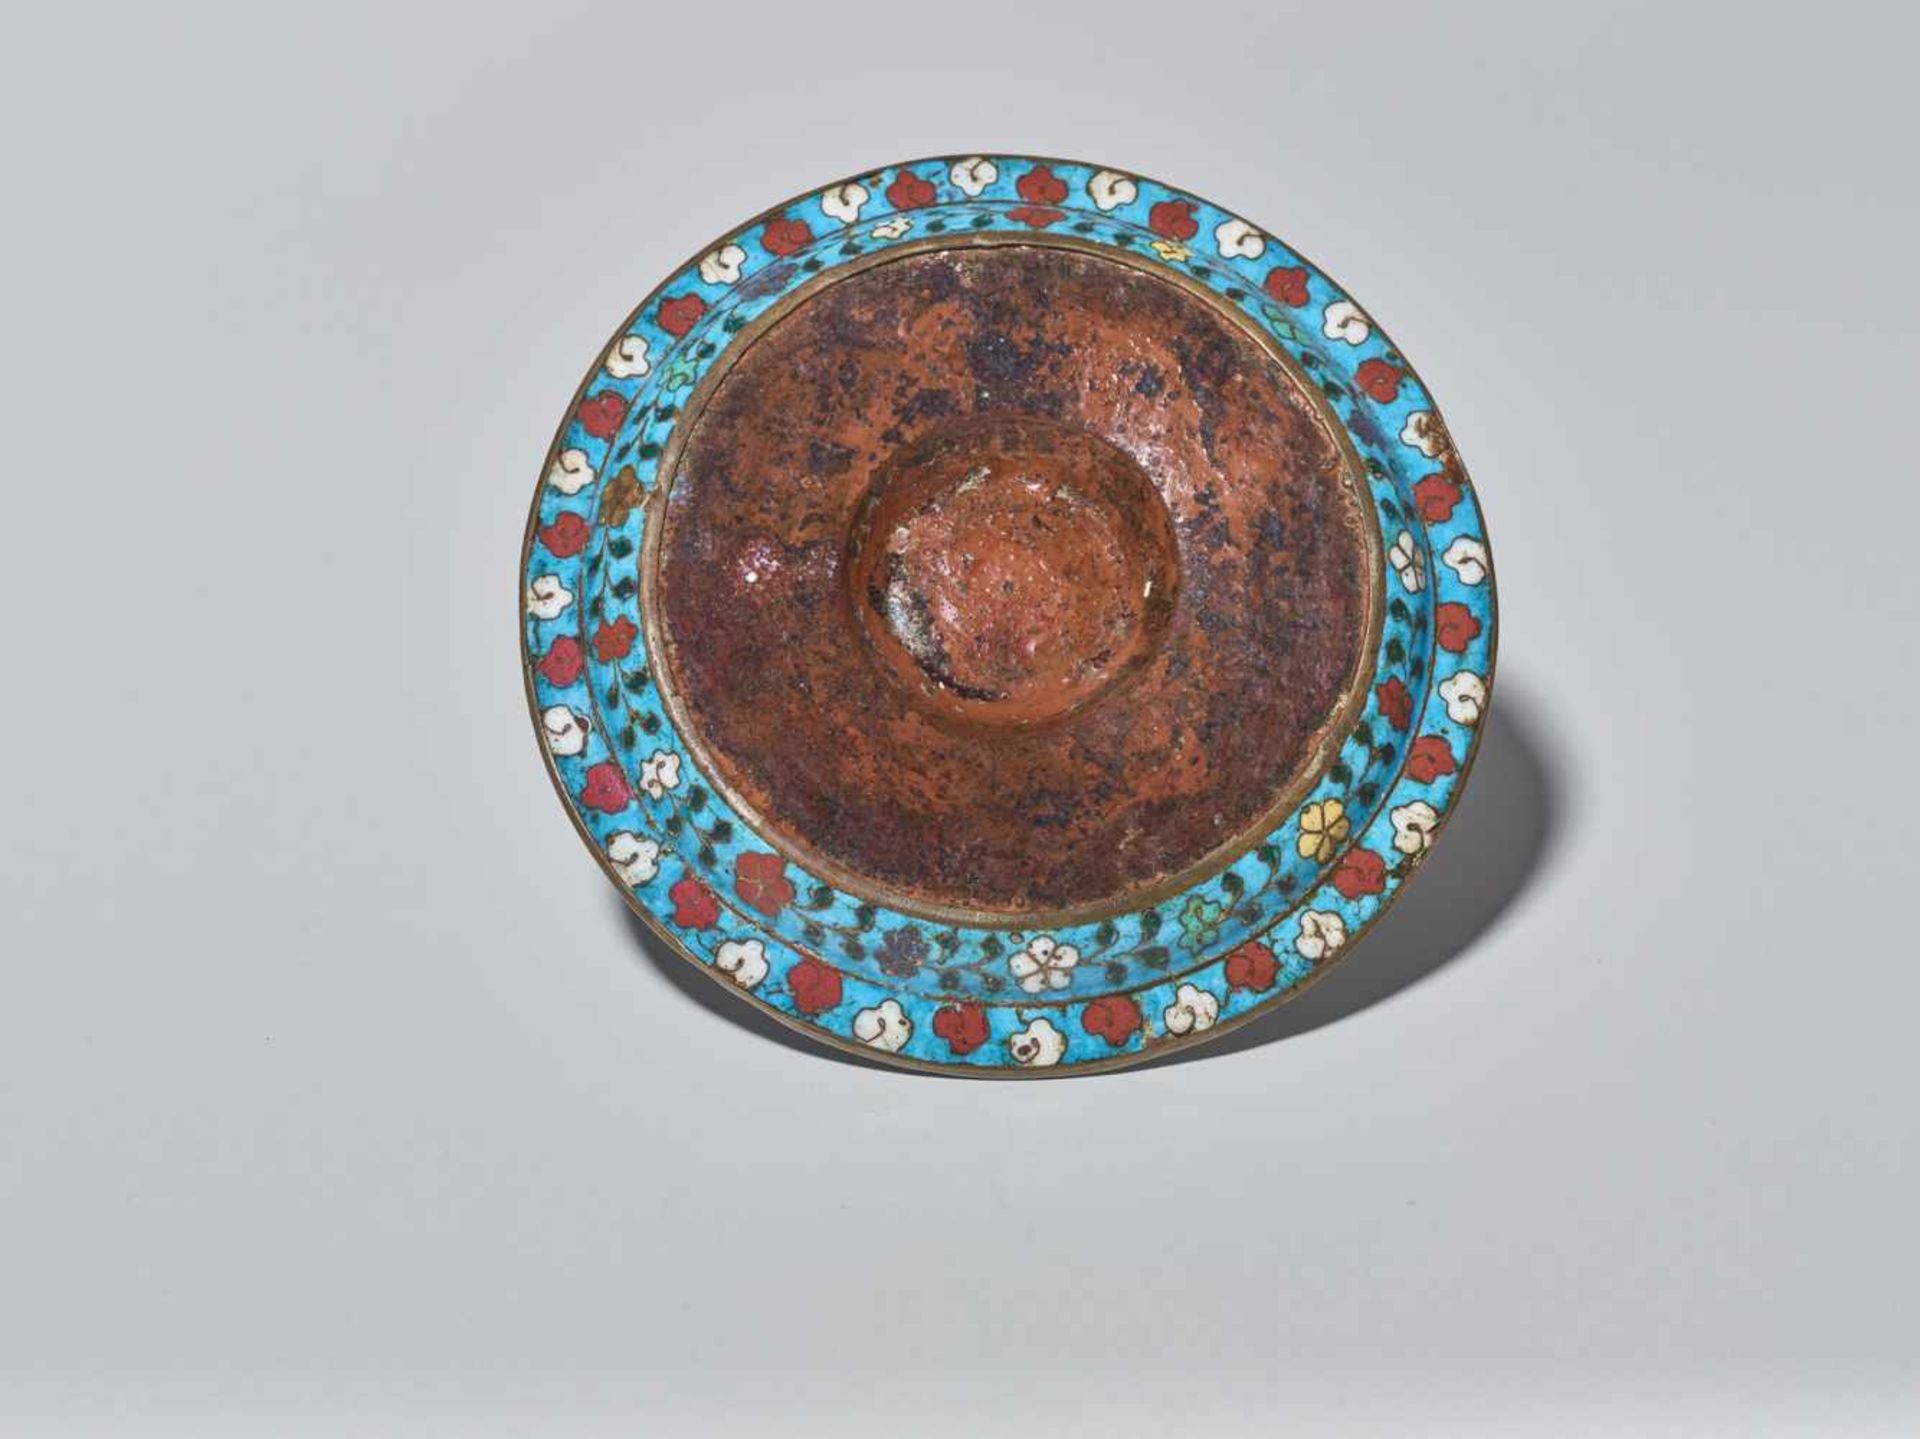 A CLOISONNÉ ENAMEL ‘LOTUS’ CUPSTAND, MING DYNASTY, 16TH CENTURY The bronze cup-stand with gilt - Bild 4 aus 7